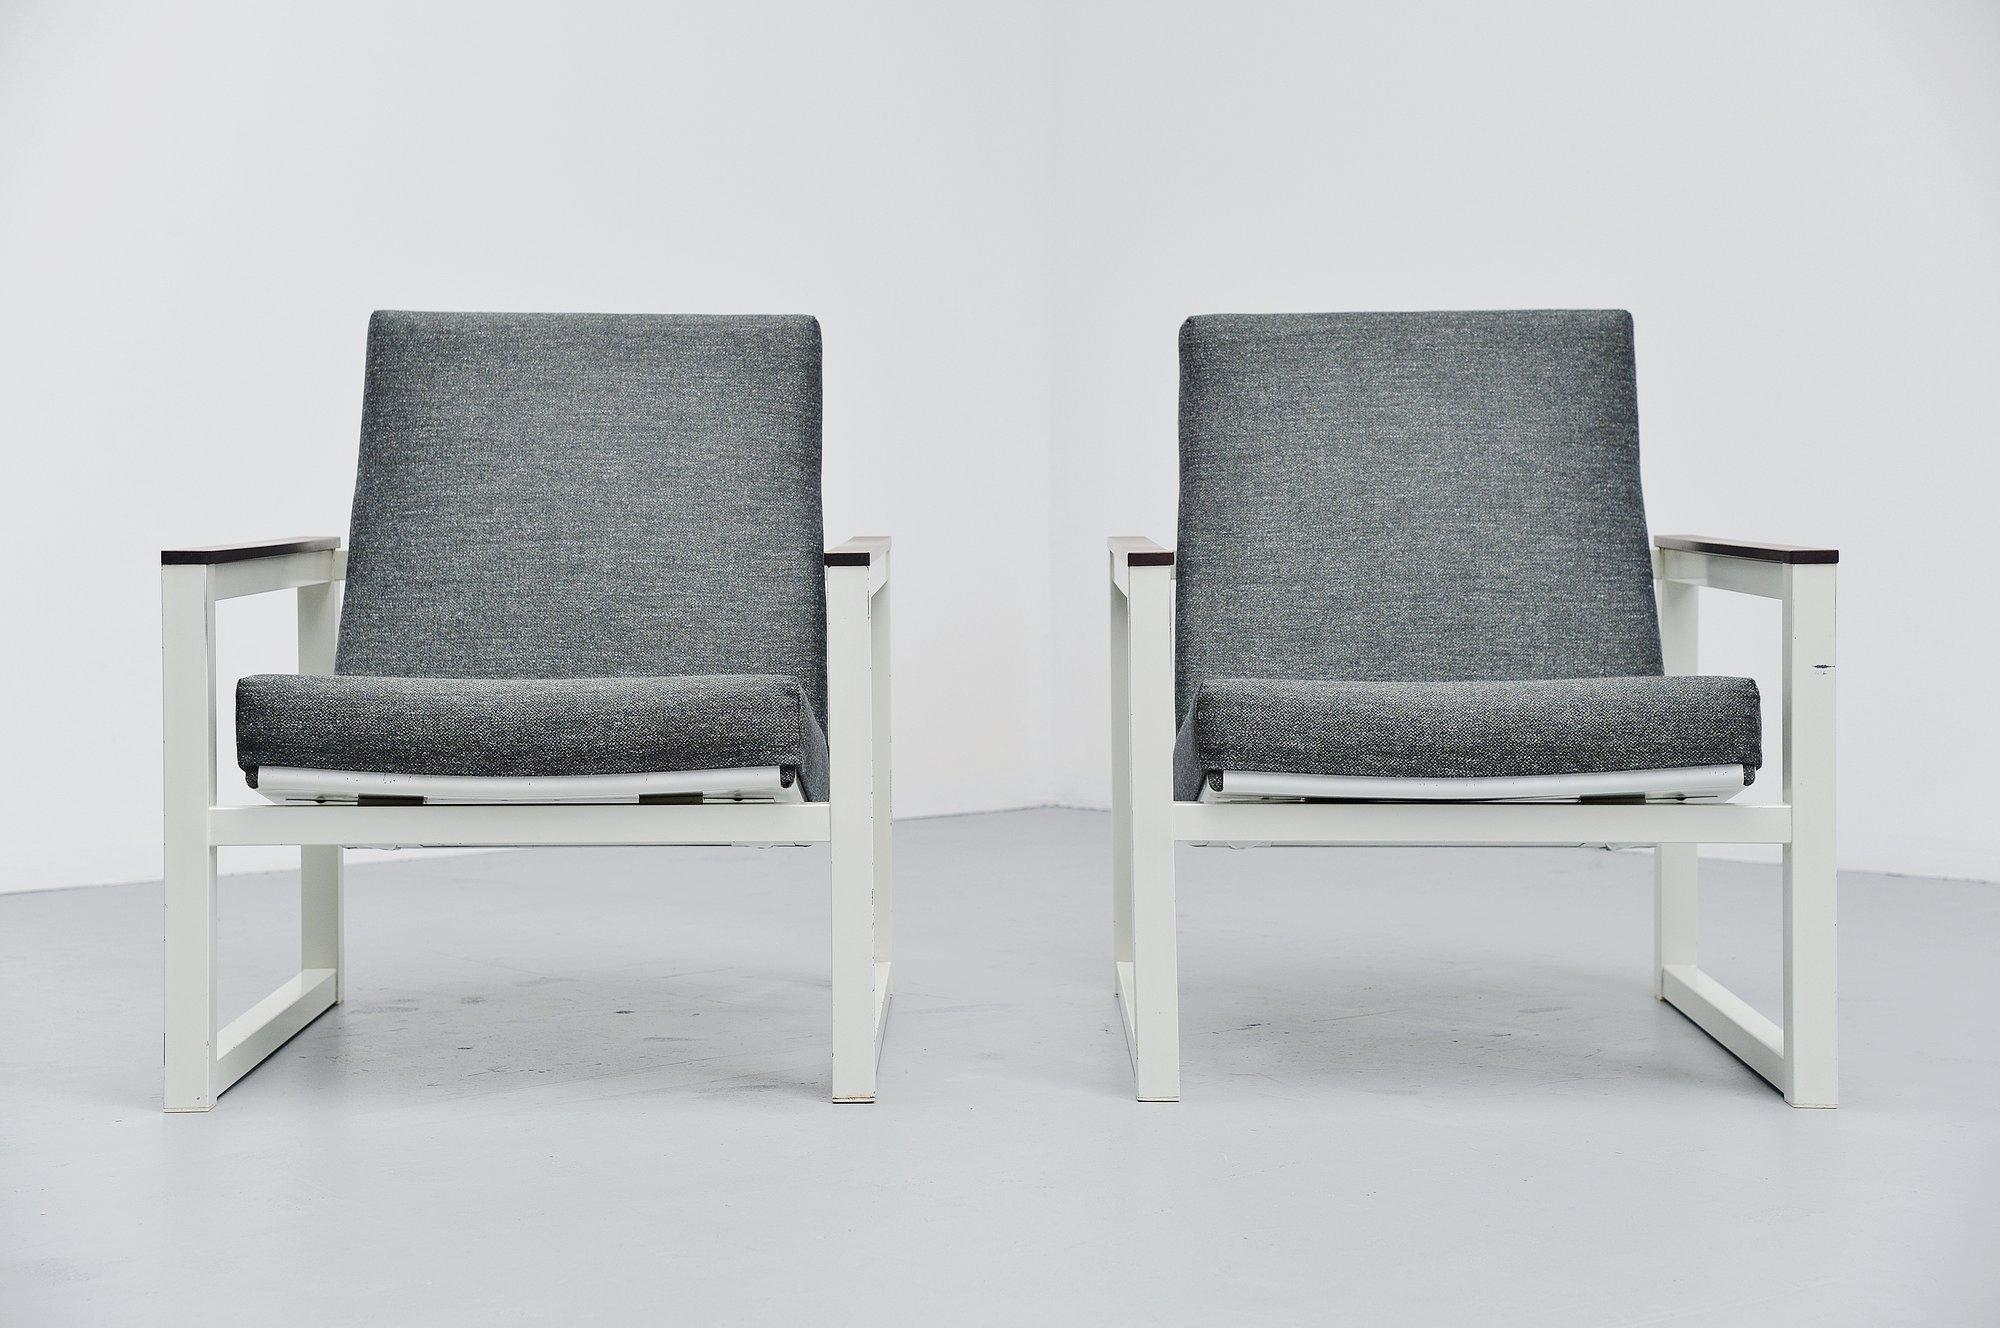 Very nice pair of industrial lounge chairs designed by a duo of industrial designers. The chair was designed by Tjerk Reijenga for Pilastro 1965, the seating structure was designed by Friso Kramer for Ahrend de Cirkel 1959. The chair is also stamped